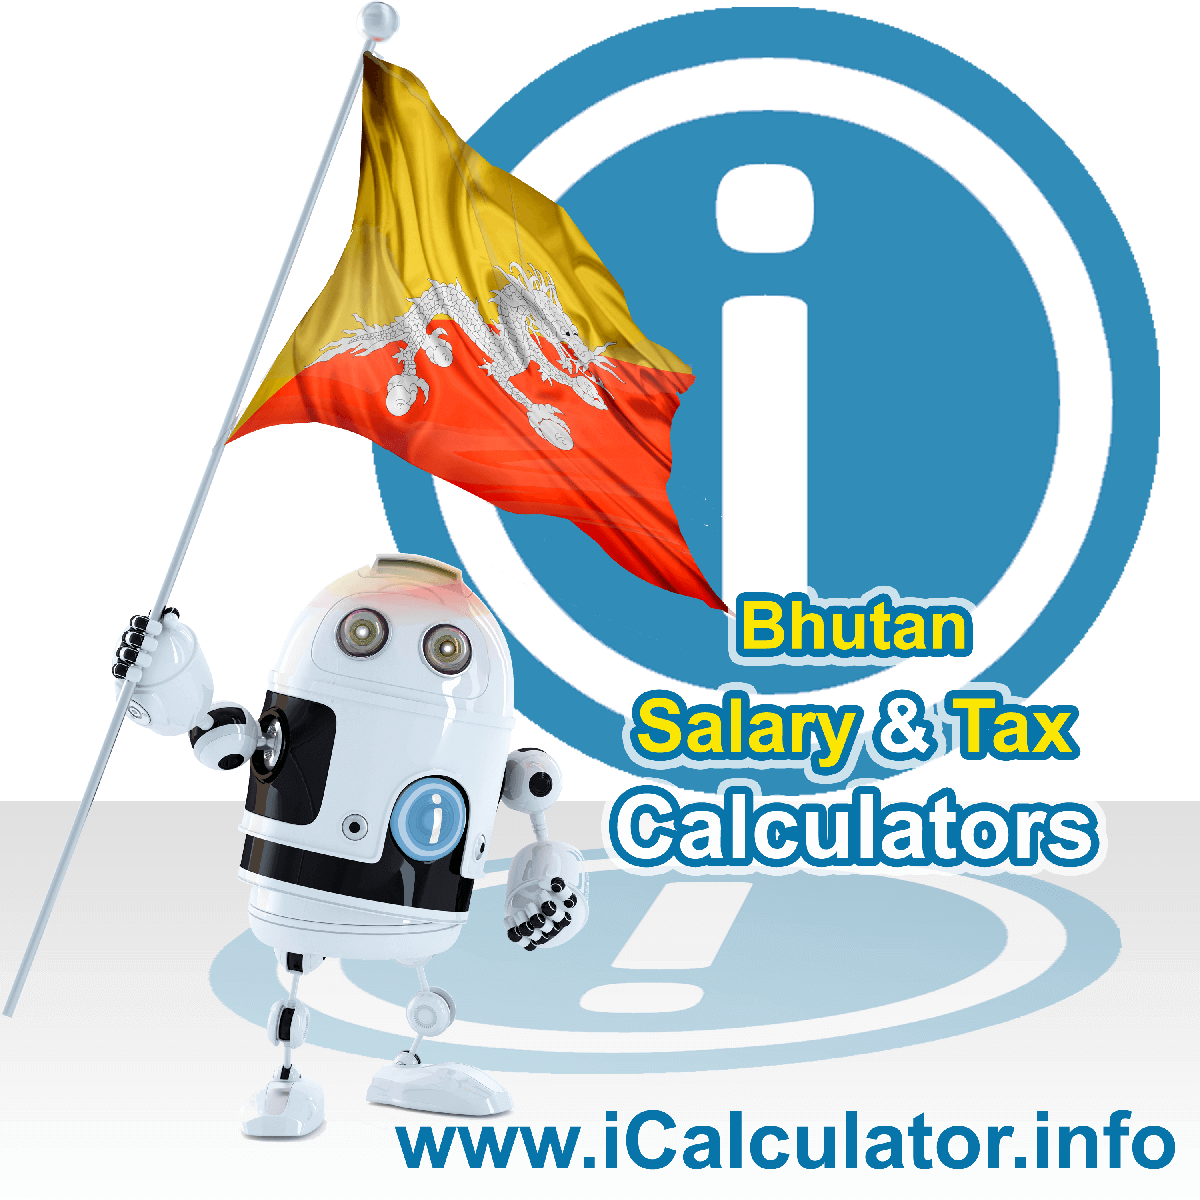 Bhutan Salary Calculator. This image shows the Bhutanese flag and information relating to the tax formula for the Bhutan Tax Calculator